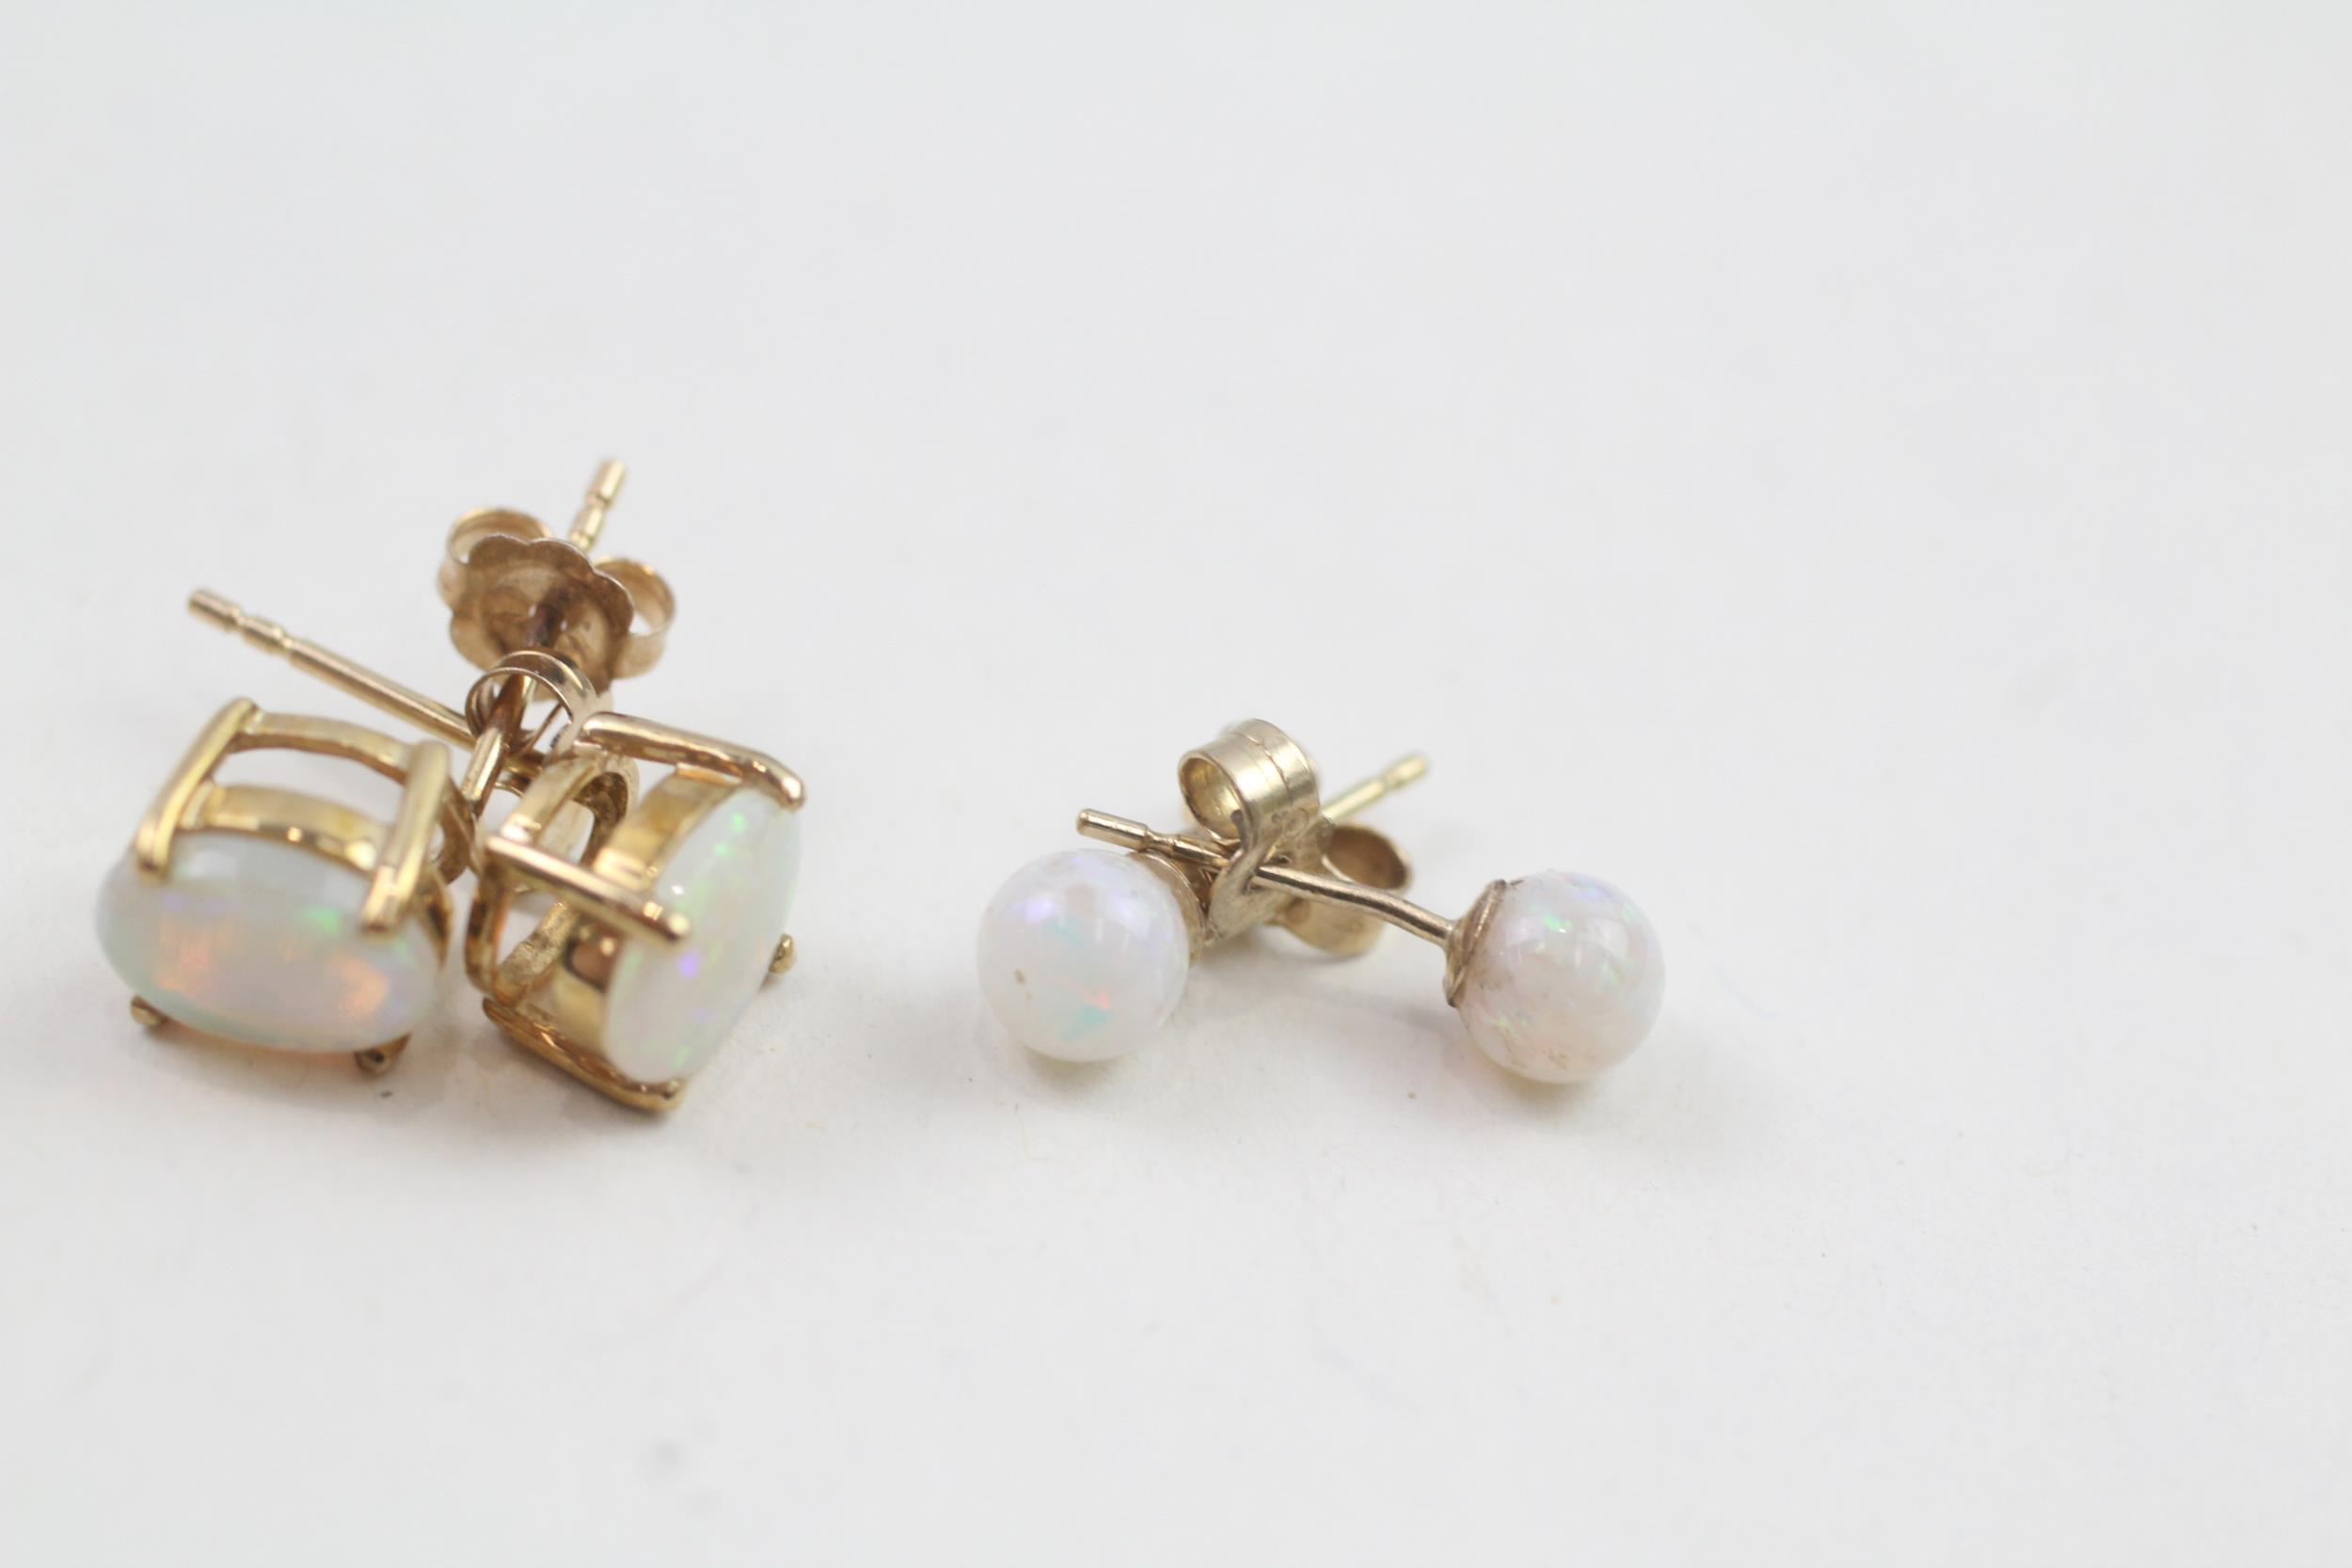 3 x 9ct gold opal earrings (3.6g) - Image 4 of 4